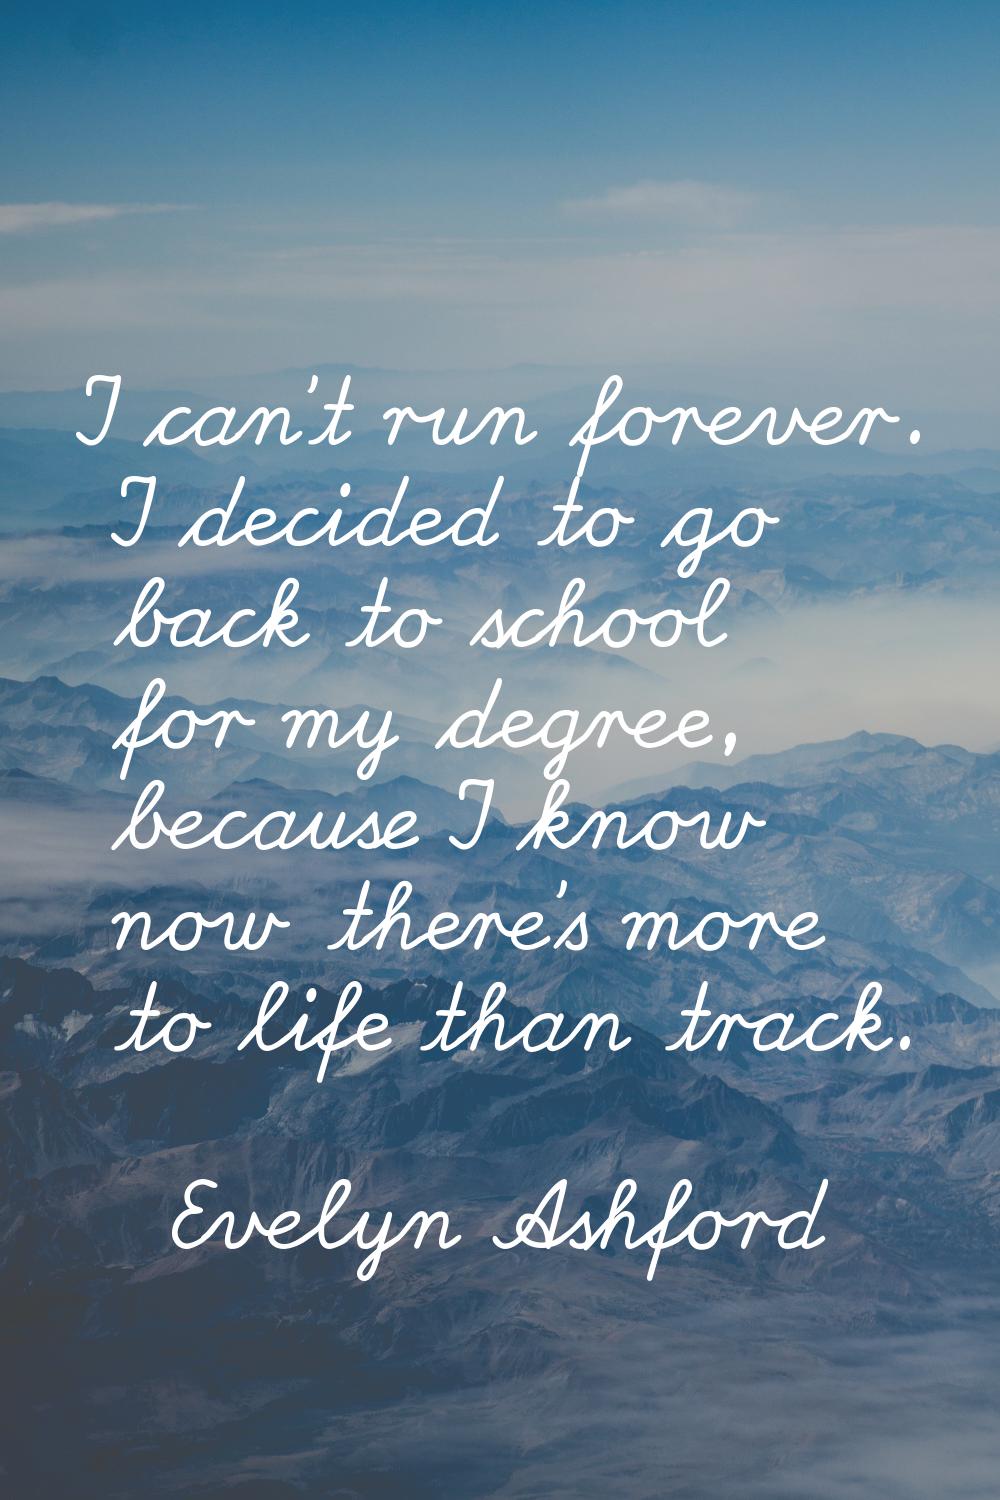 I can't run forever. I decided to go back to school for my degree, because I know now there's more 